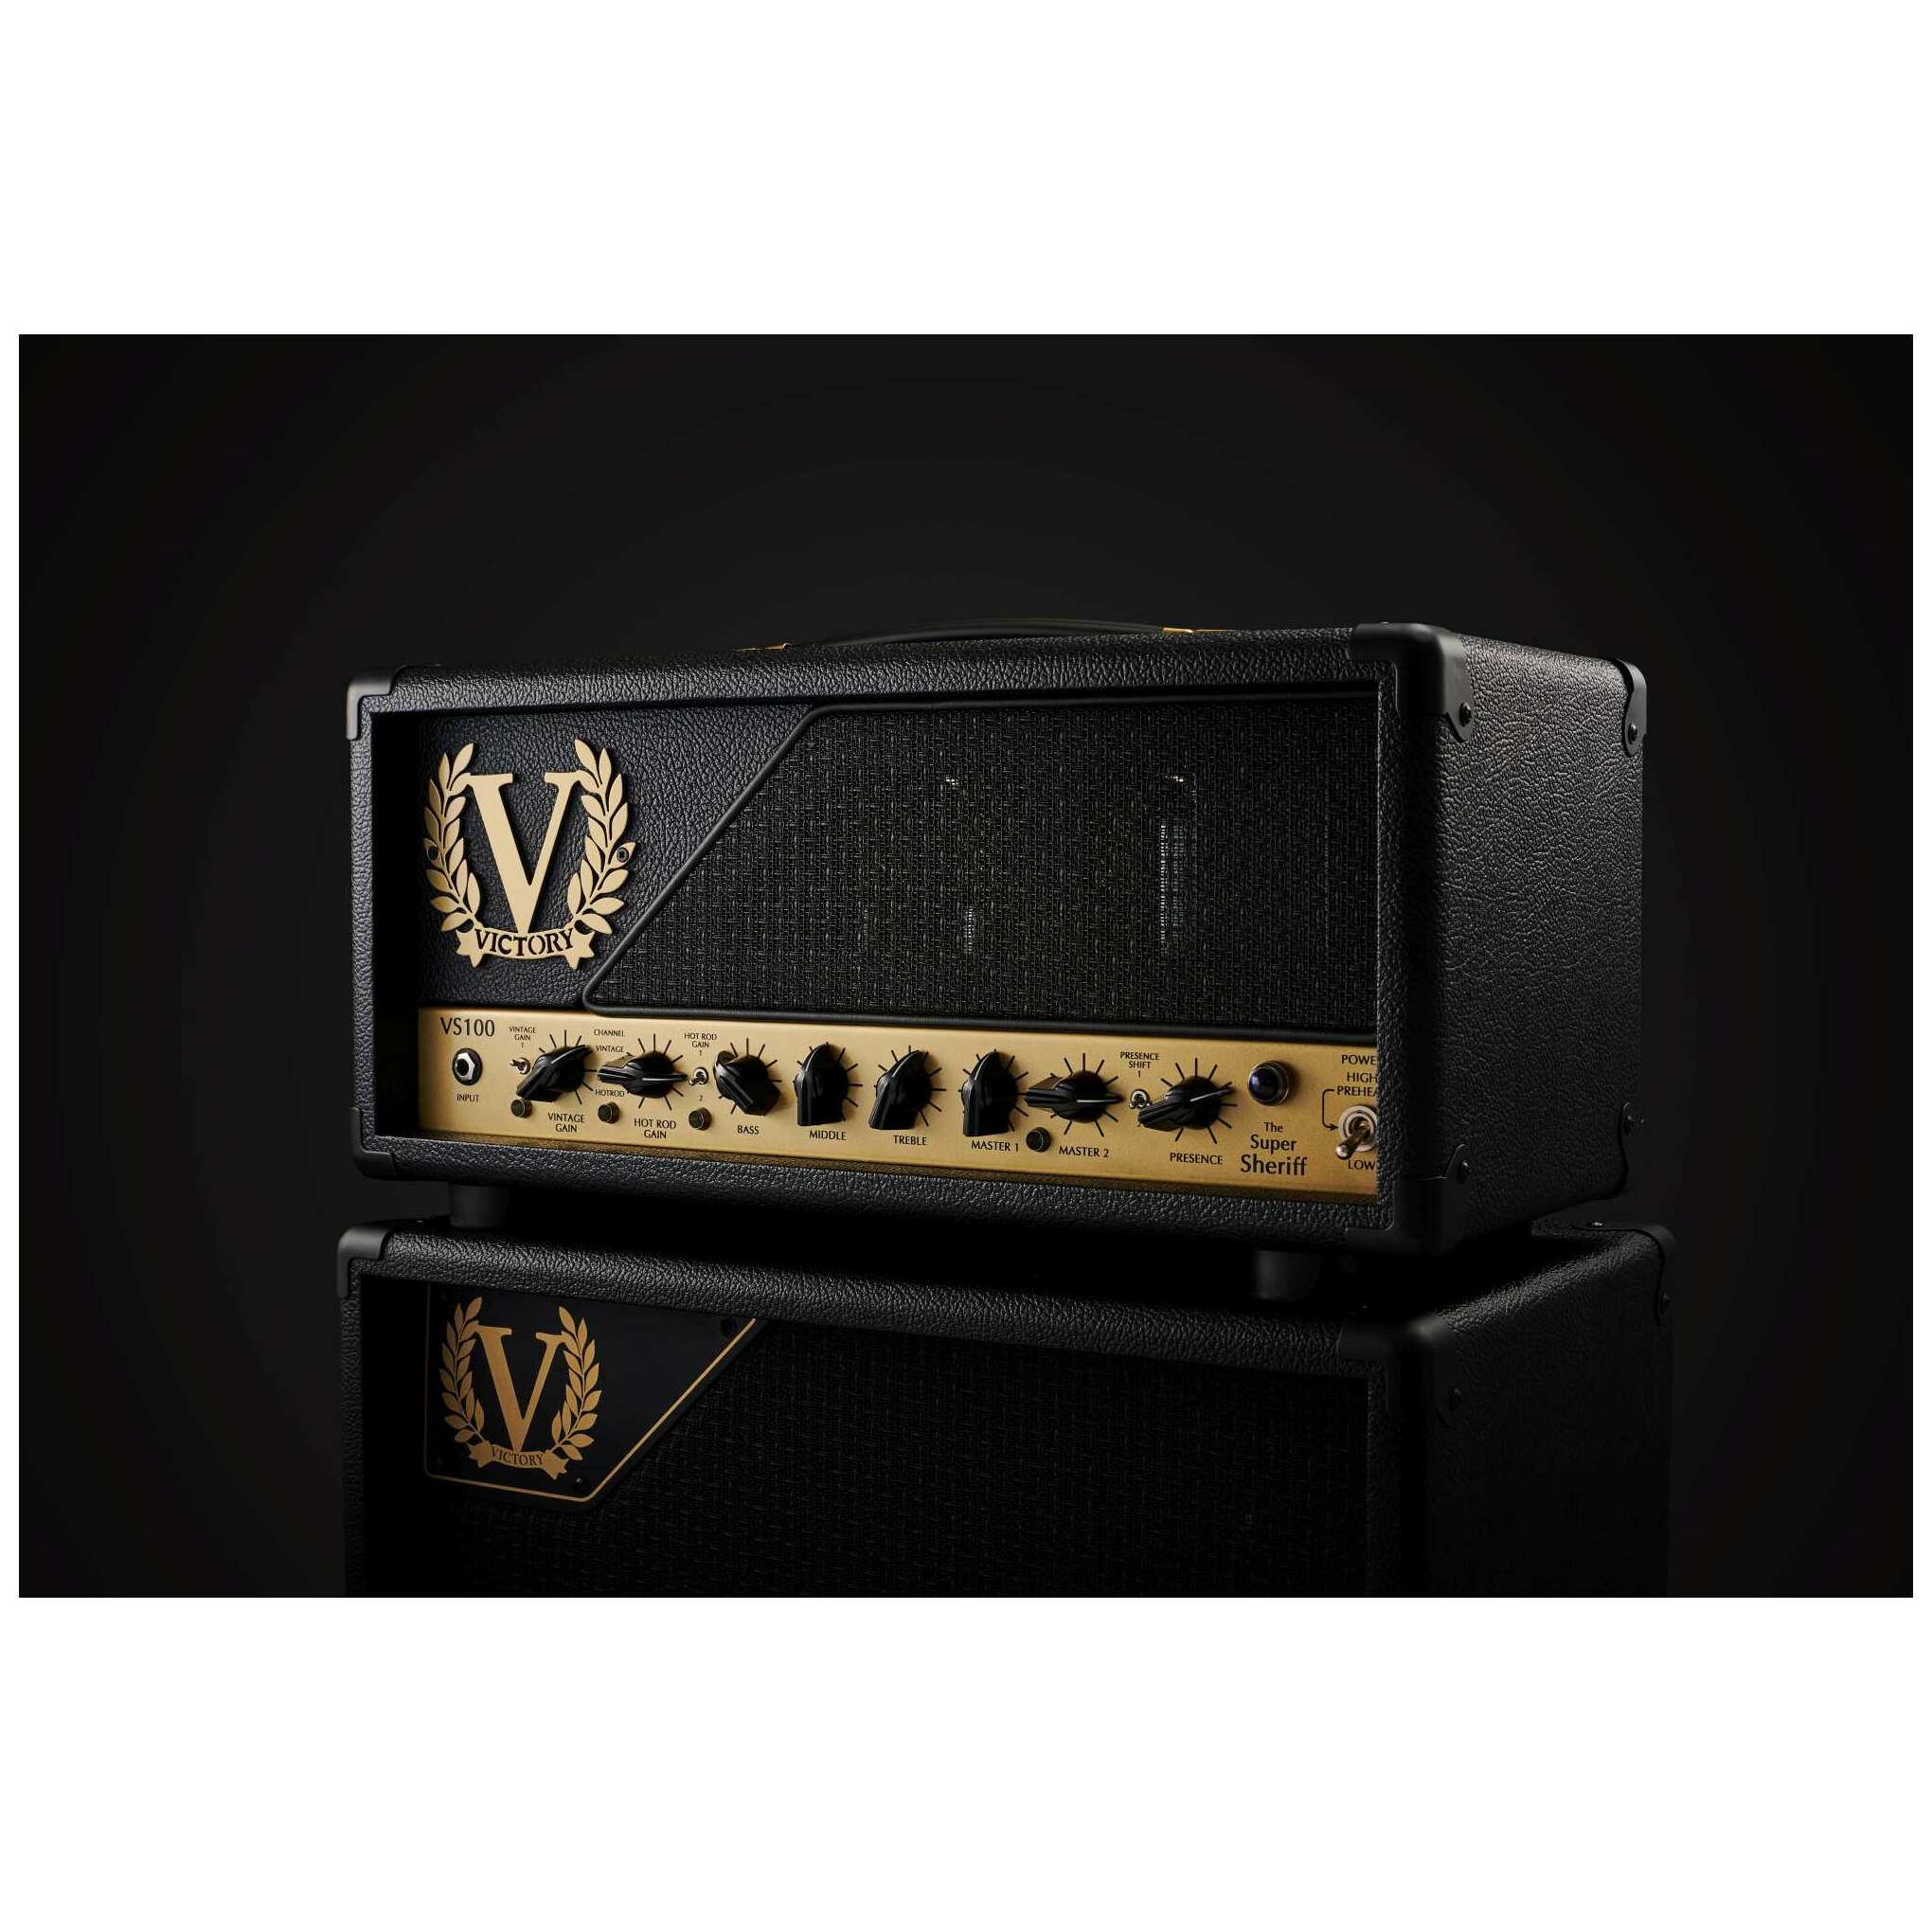 Victory Amps The Sheriff 100 Compact Head 2